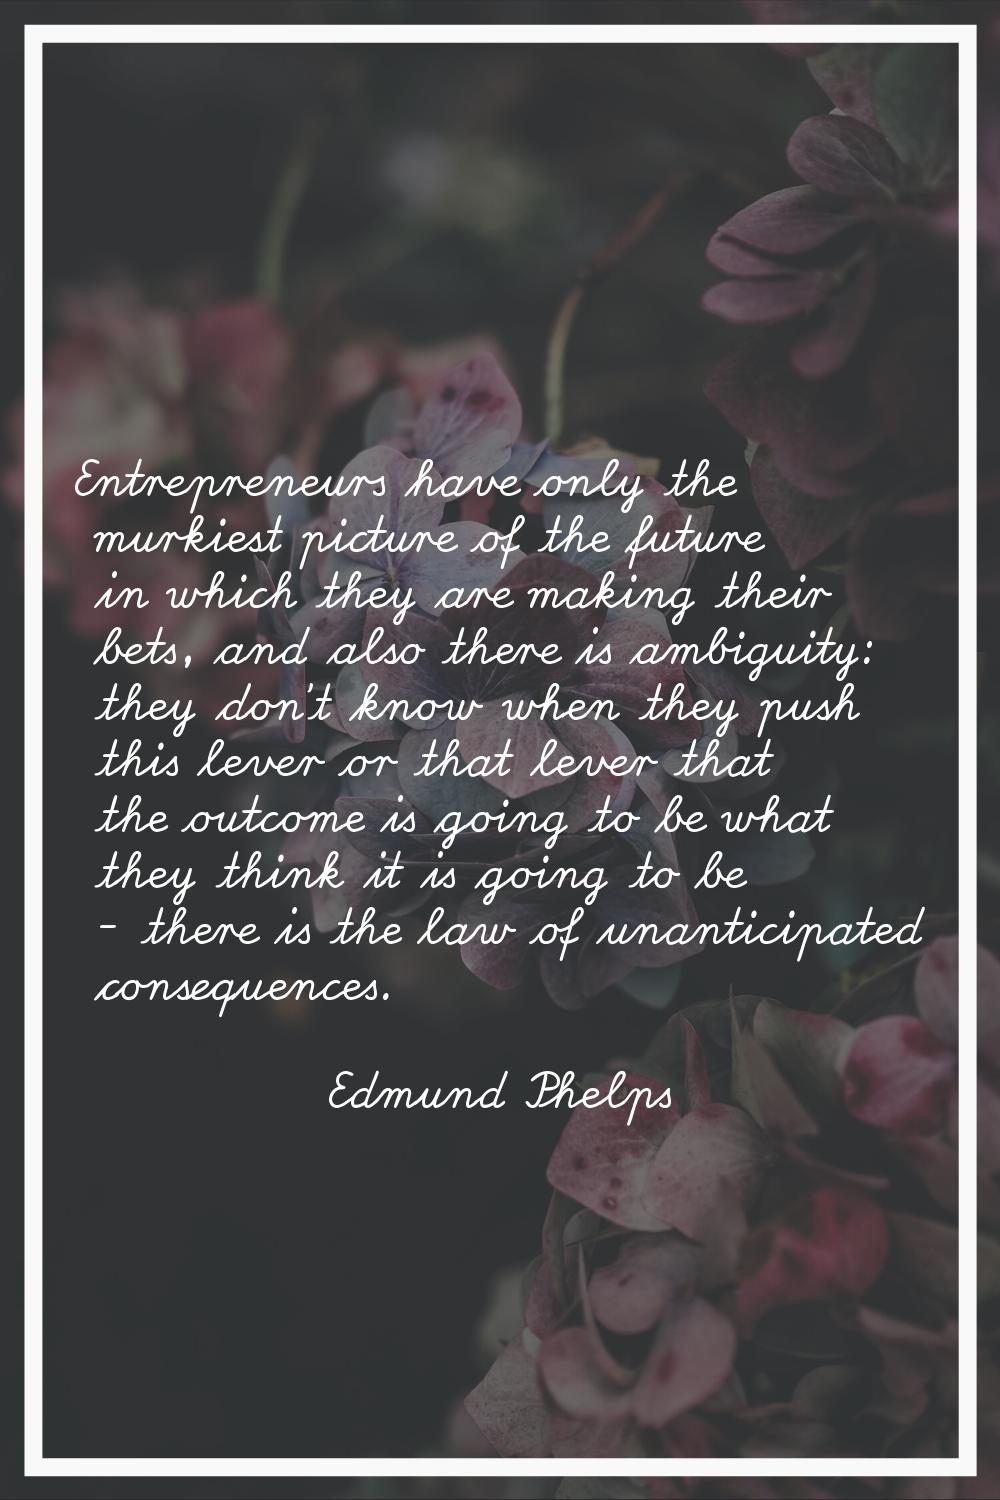 Entrepreneurs have only the murkiest picture of the future in which they are making their bets, and